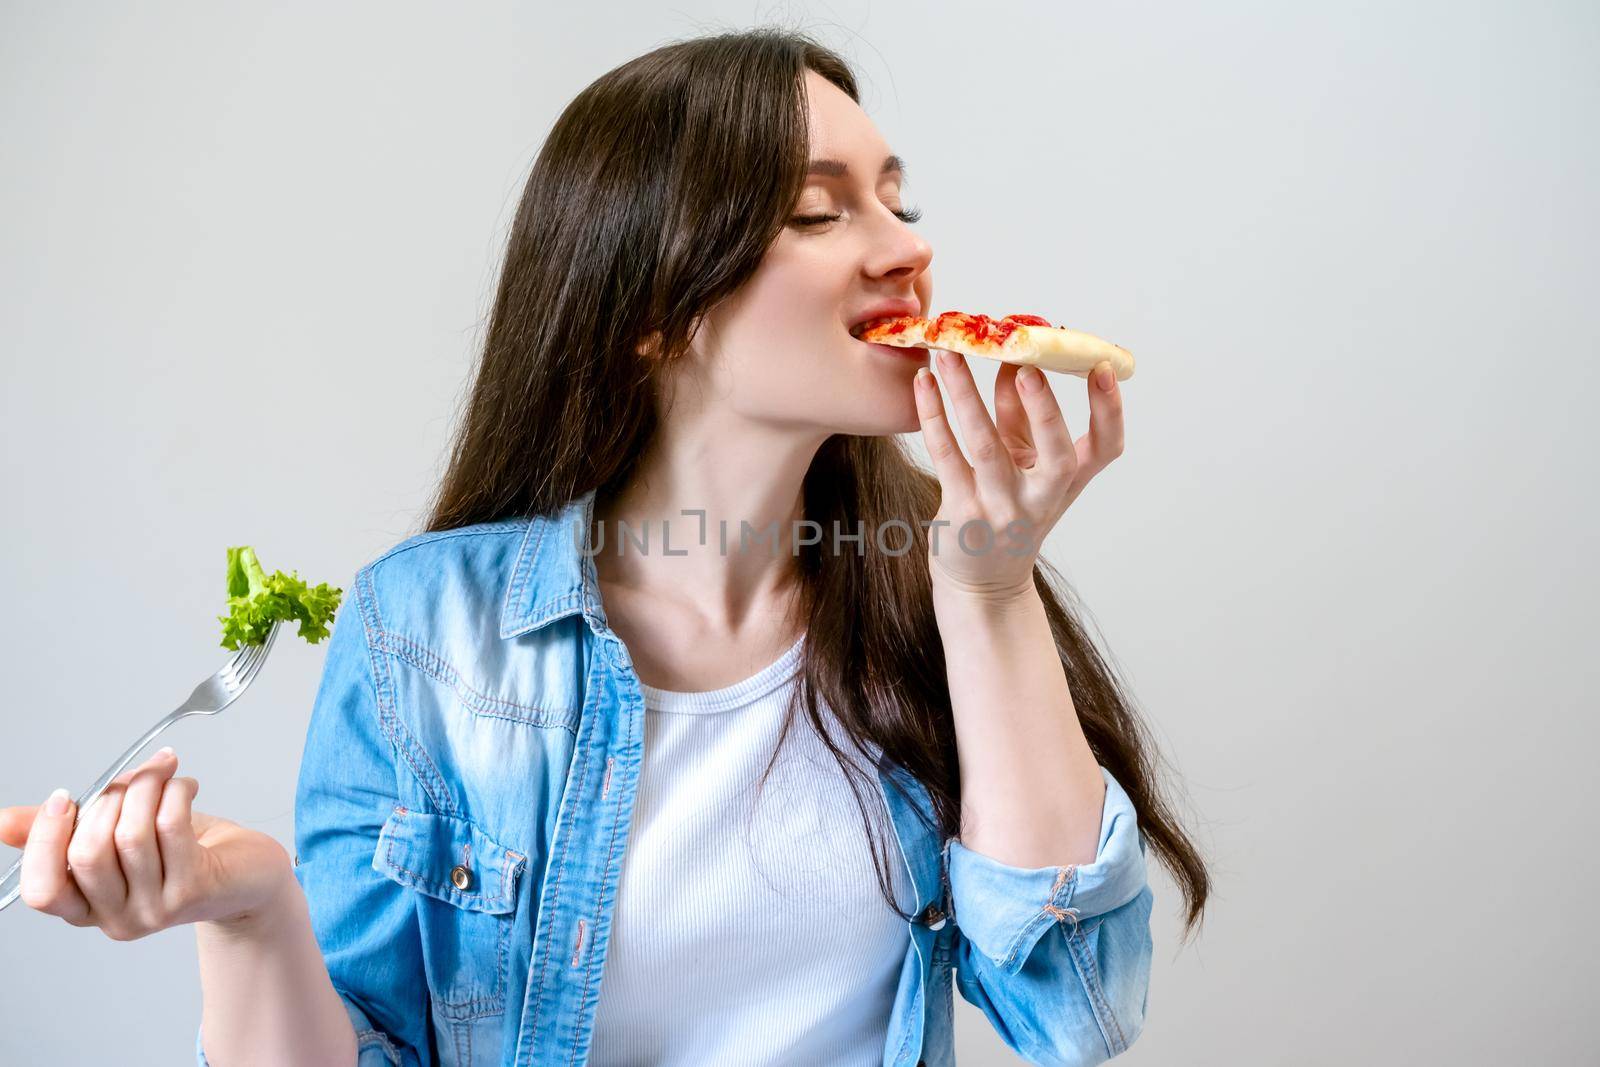 Young beautiful woman breaks the diet, but happy eats pizza instead of salad.